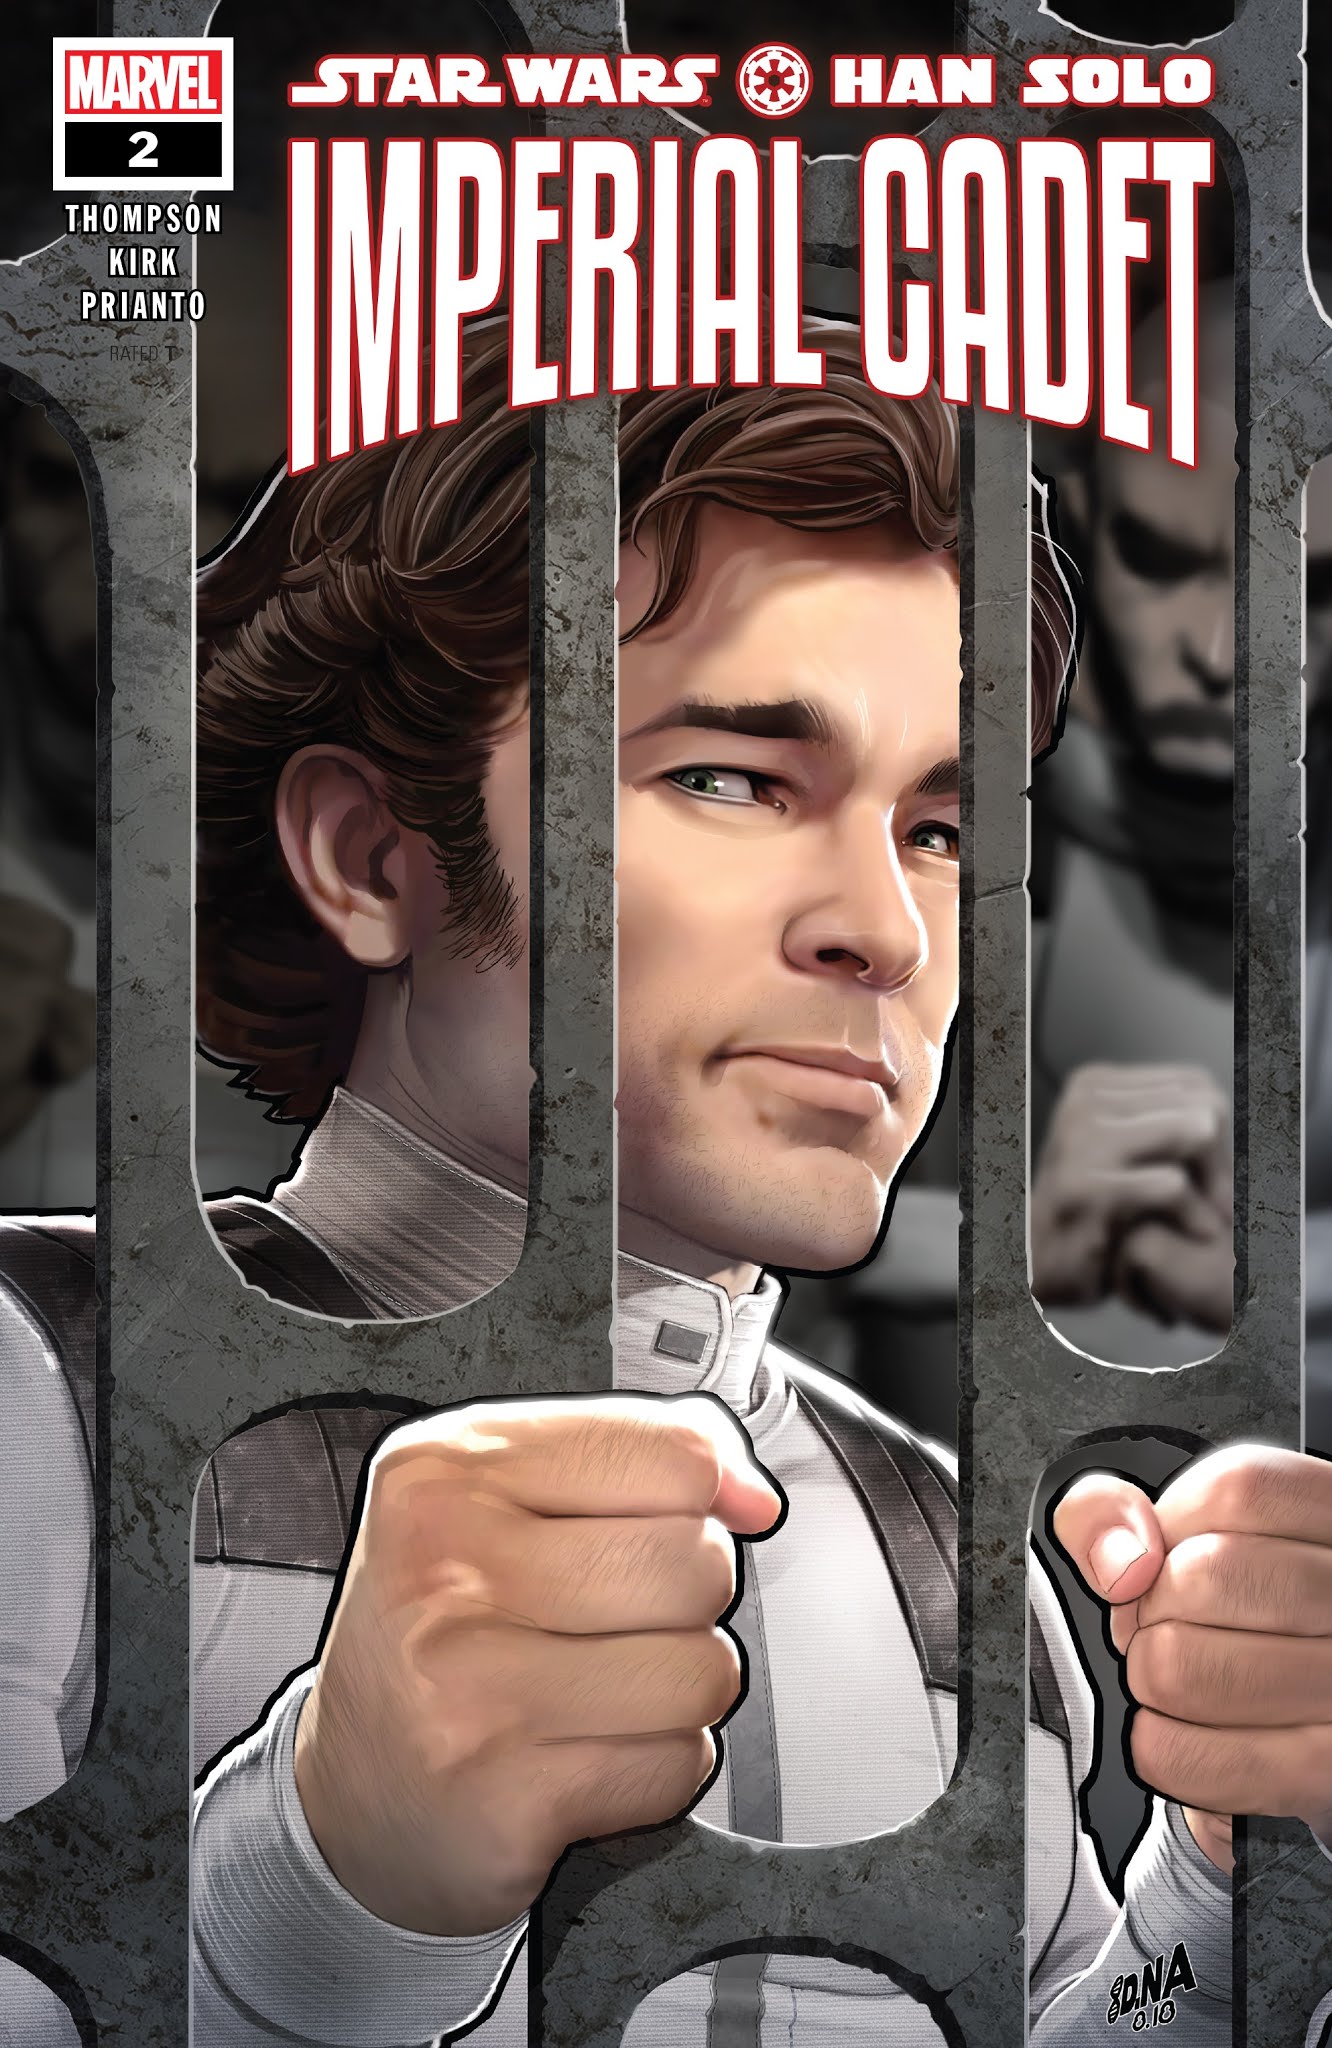 Read online Star Wars: Han Solo - Imperial Cadet comic -  Issue #2 - 1